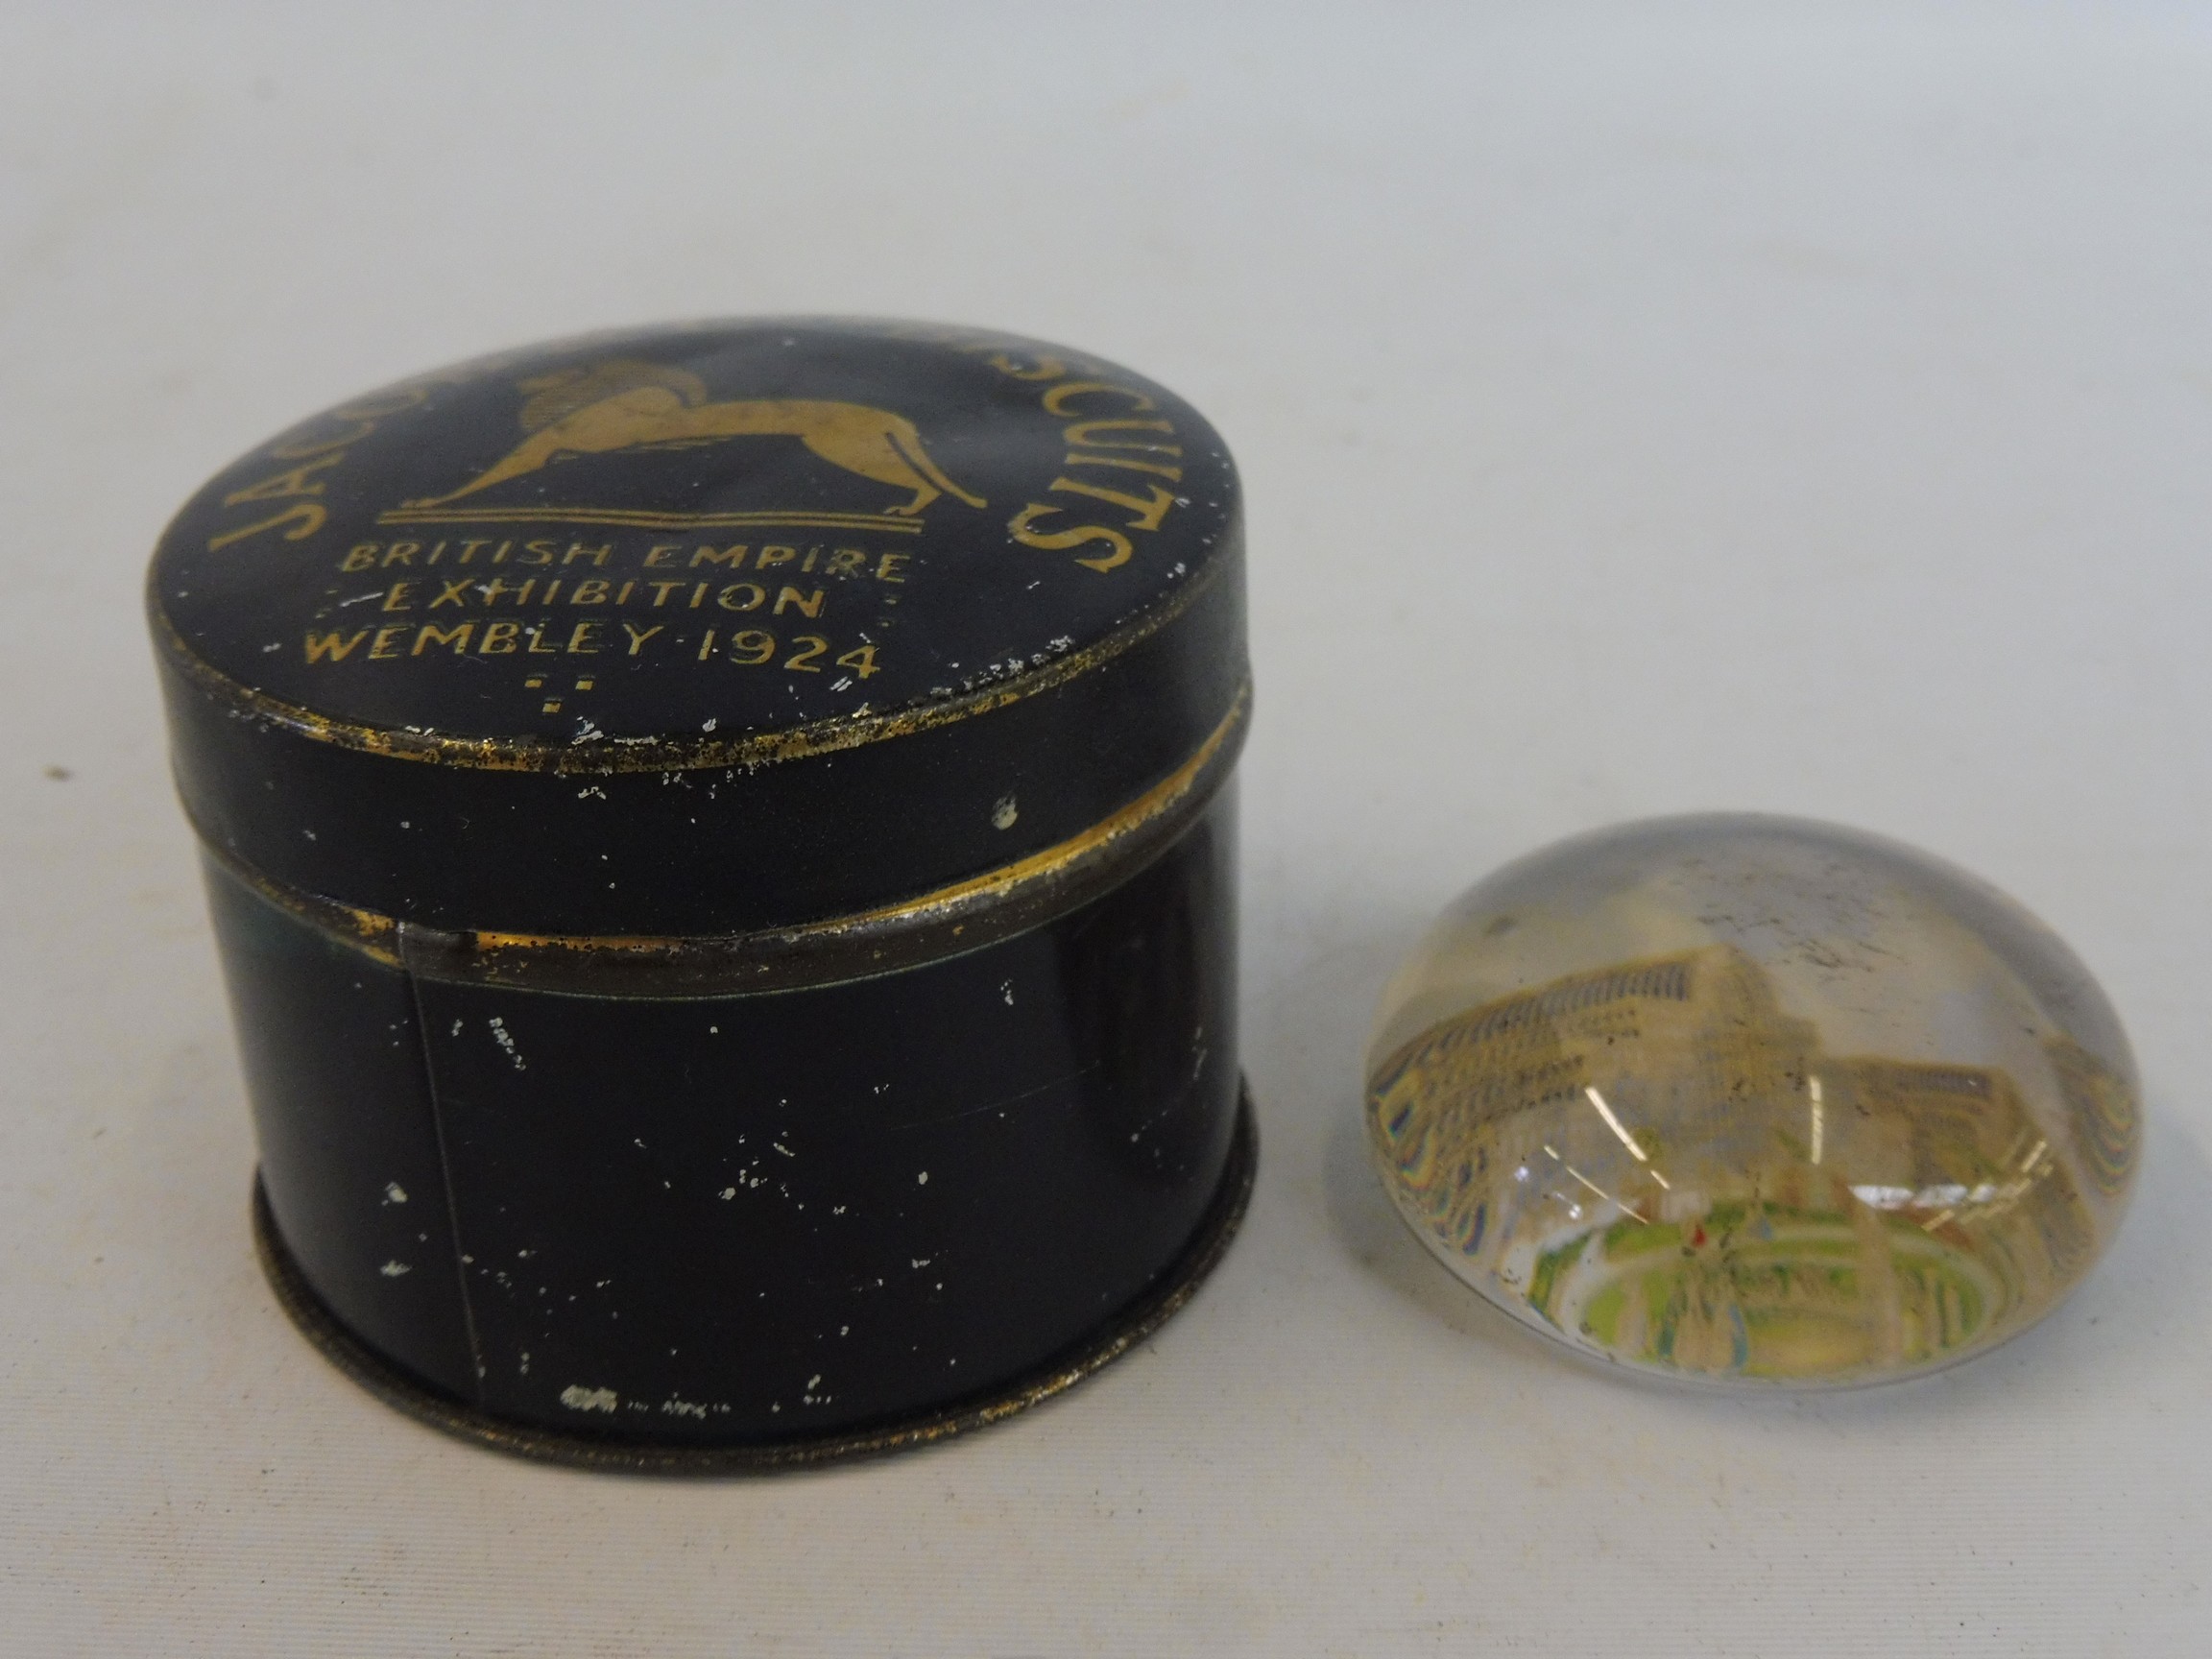 A small Jacob & Co's Biscuits British Empire Exhibition Wembley 1924 cylindrical lidded sample - Image 2 of 2